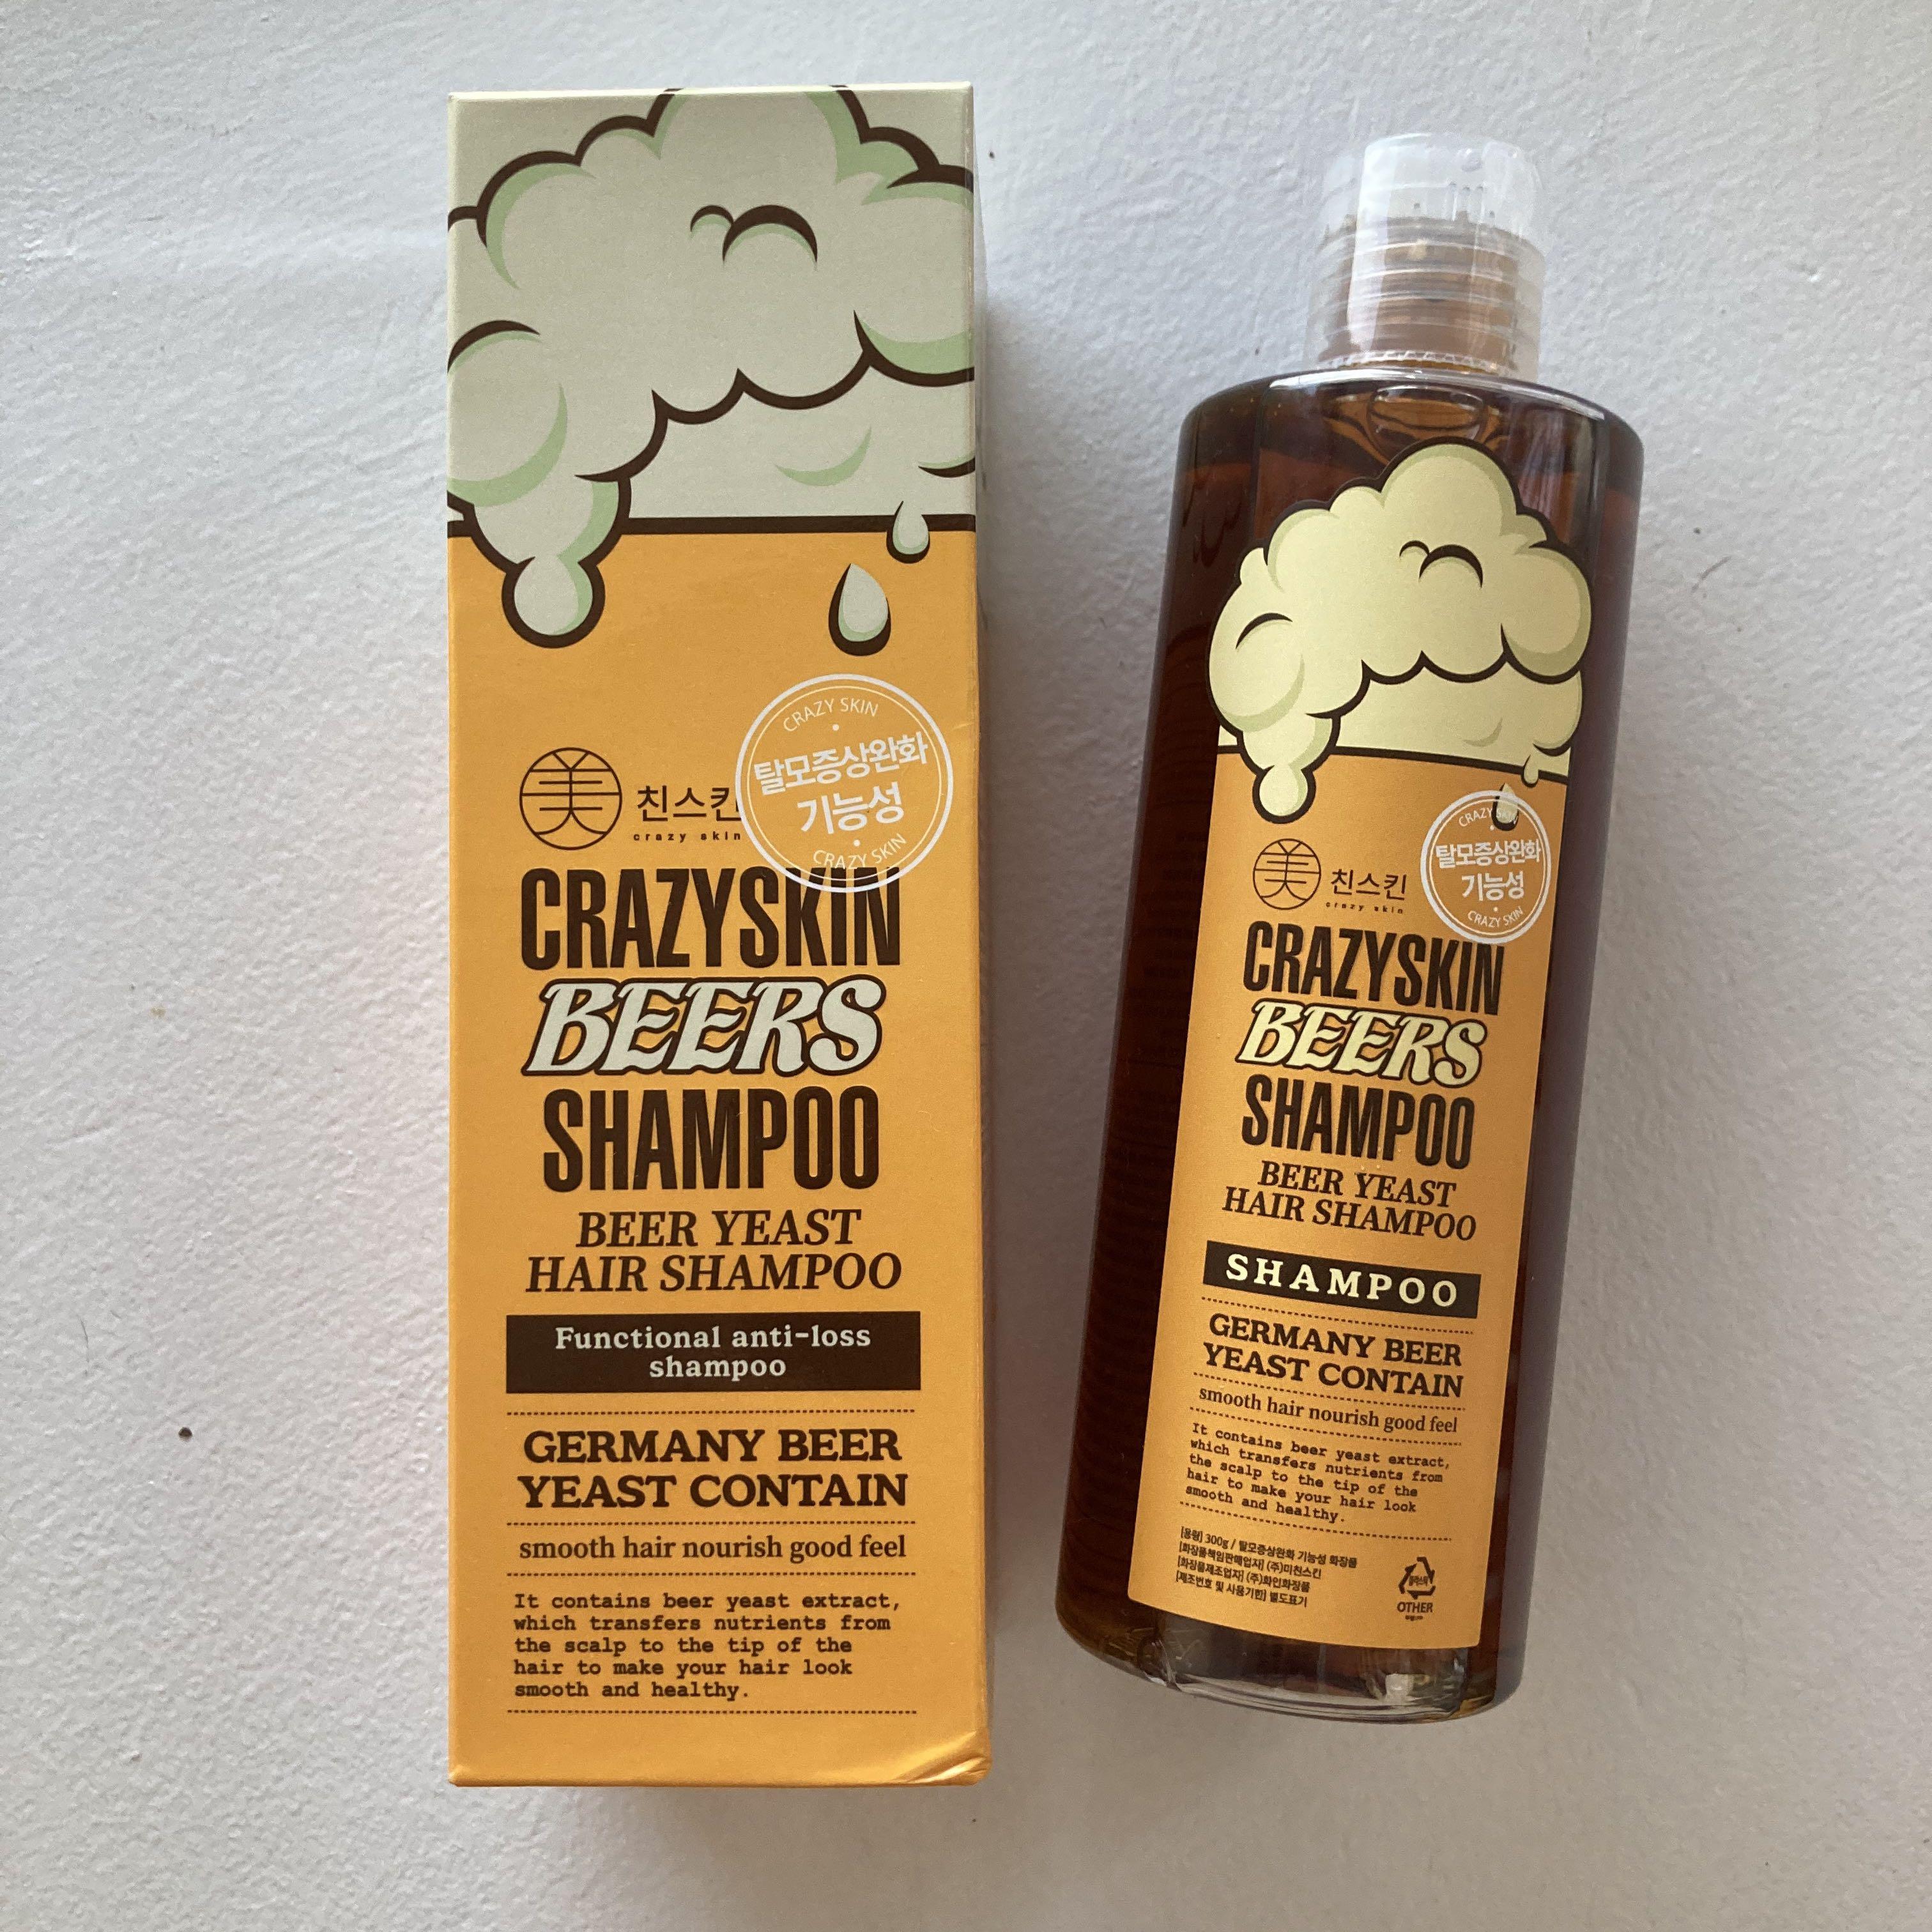 CRAZY SKIN Beers Shampoo 300g - pH  German Beer Yeast Scalp Care Hair  Shampoo, No Silicone, Paraben Free, Rich in Biotin, Protein Contained, Anti Hair  Loss Shampoo, Beauty & Personal Care,